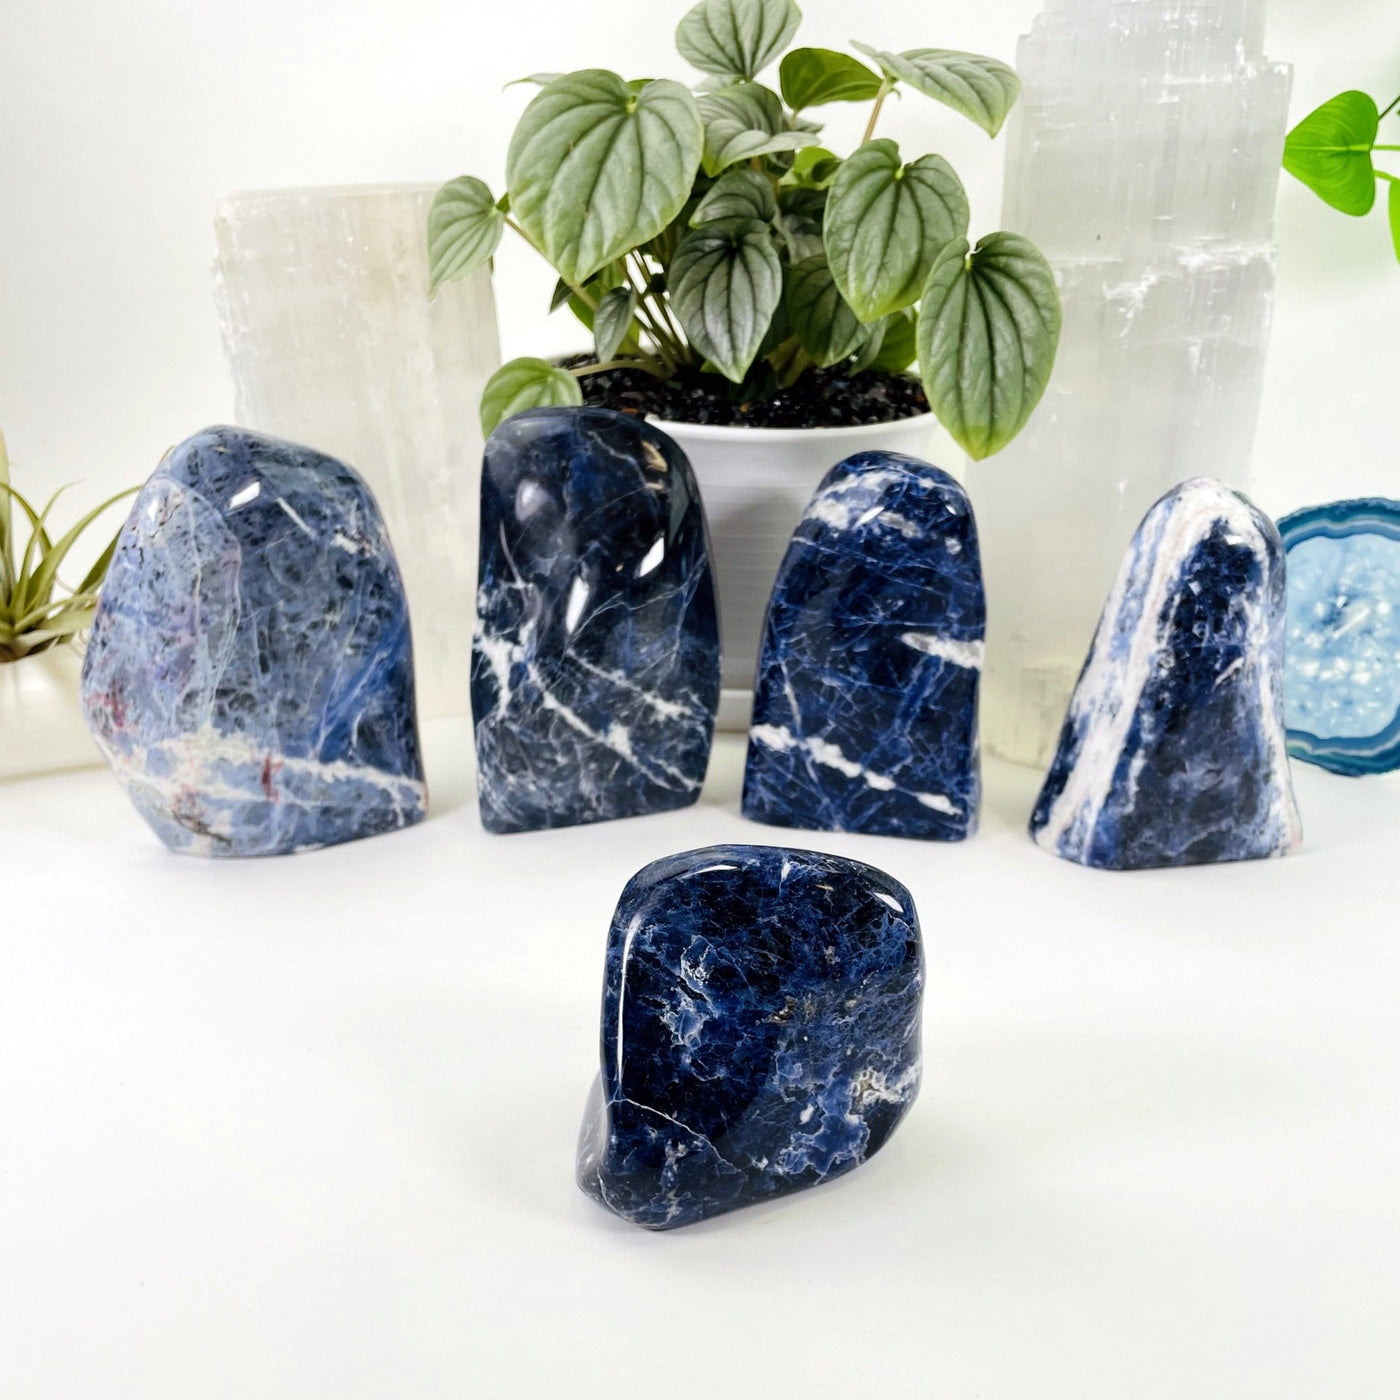 one sodalite polished cut base in front with four others in a row behind